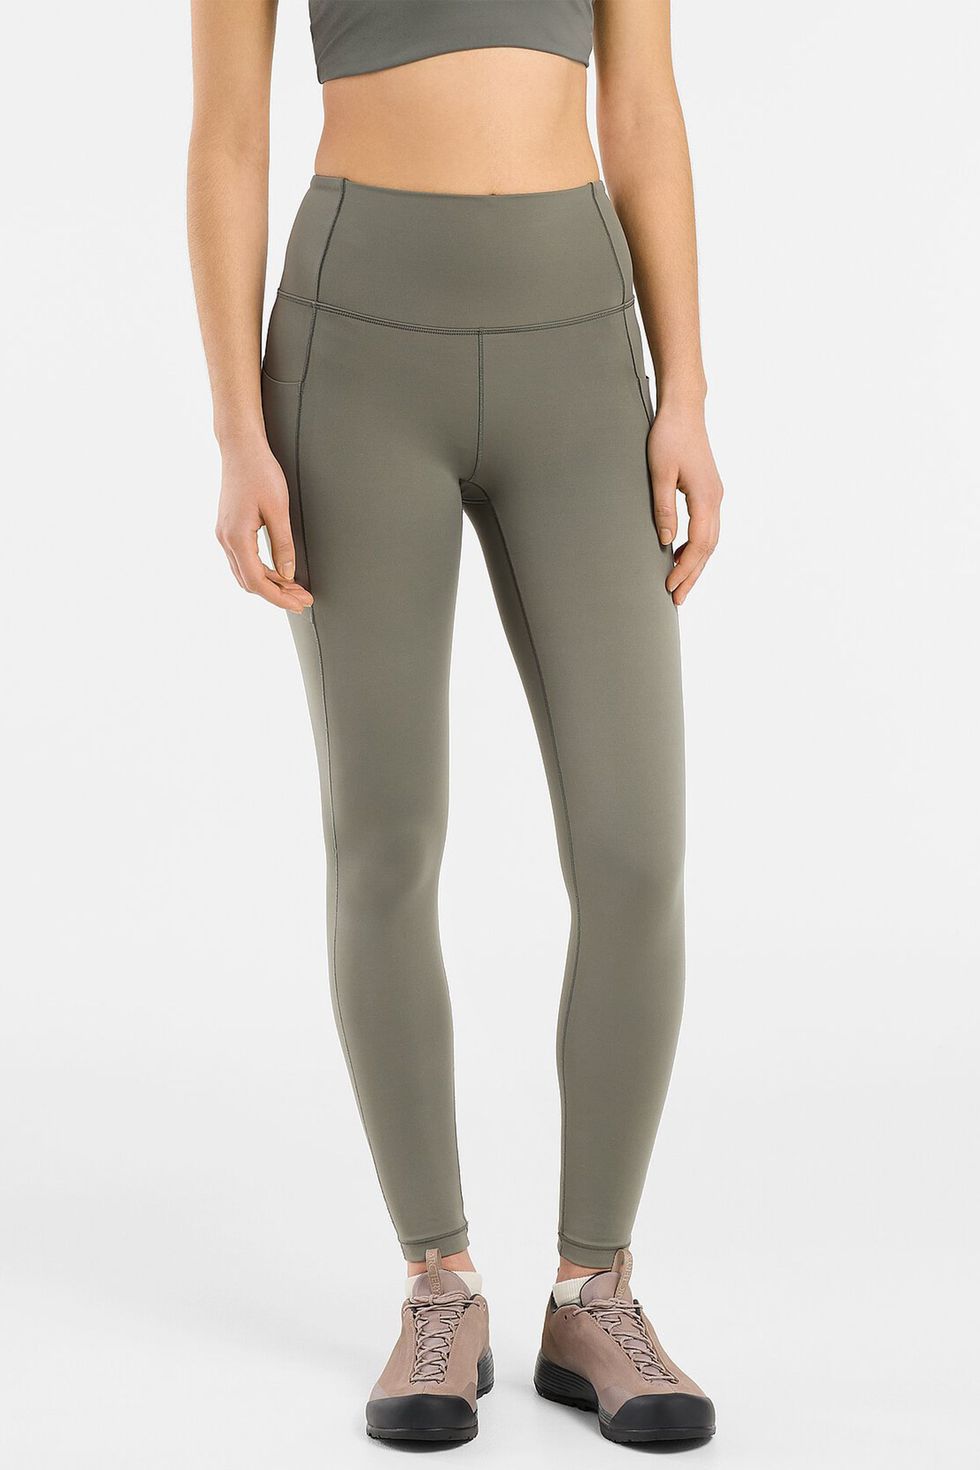 Army Green Middle Waisted Leggings 25” & Reviews - Army Green